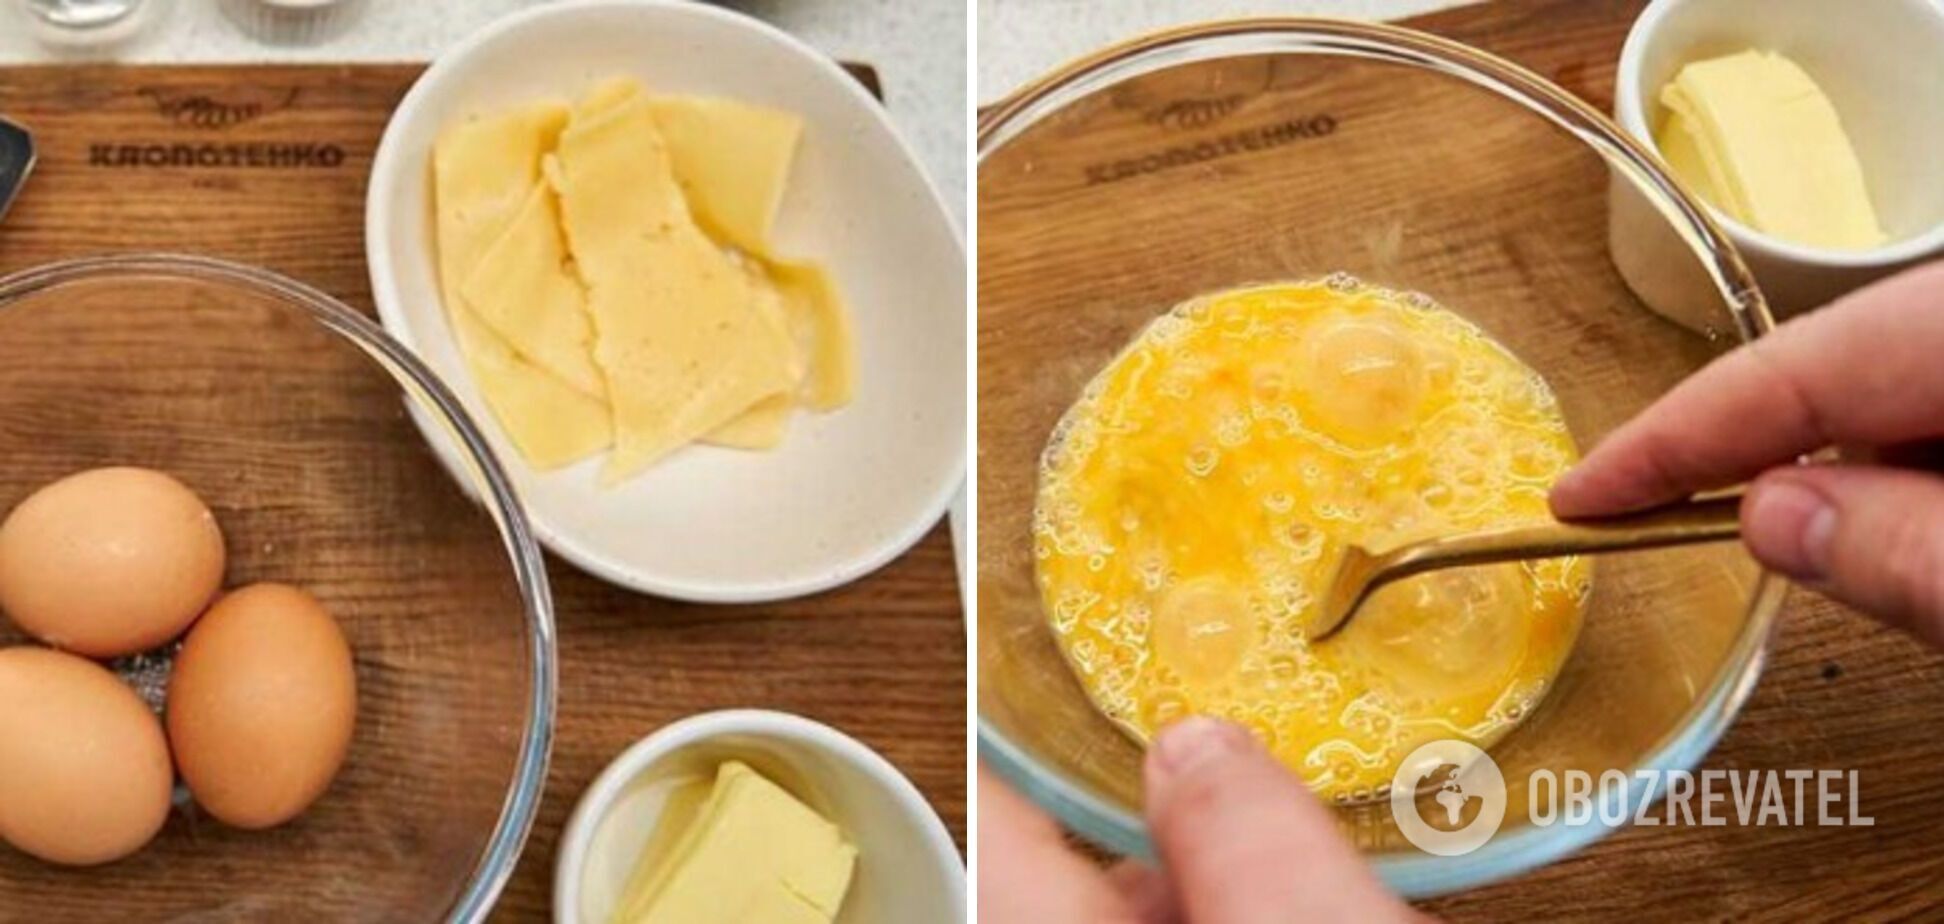 How to make a successful and delicious omelet at home